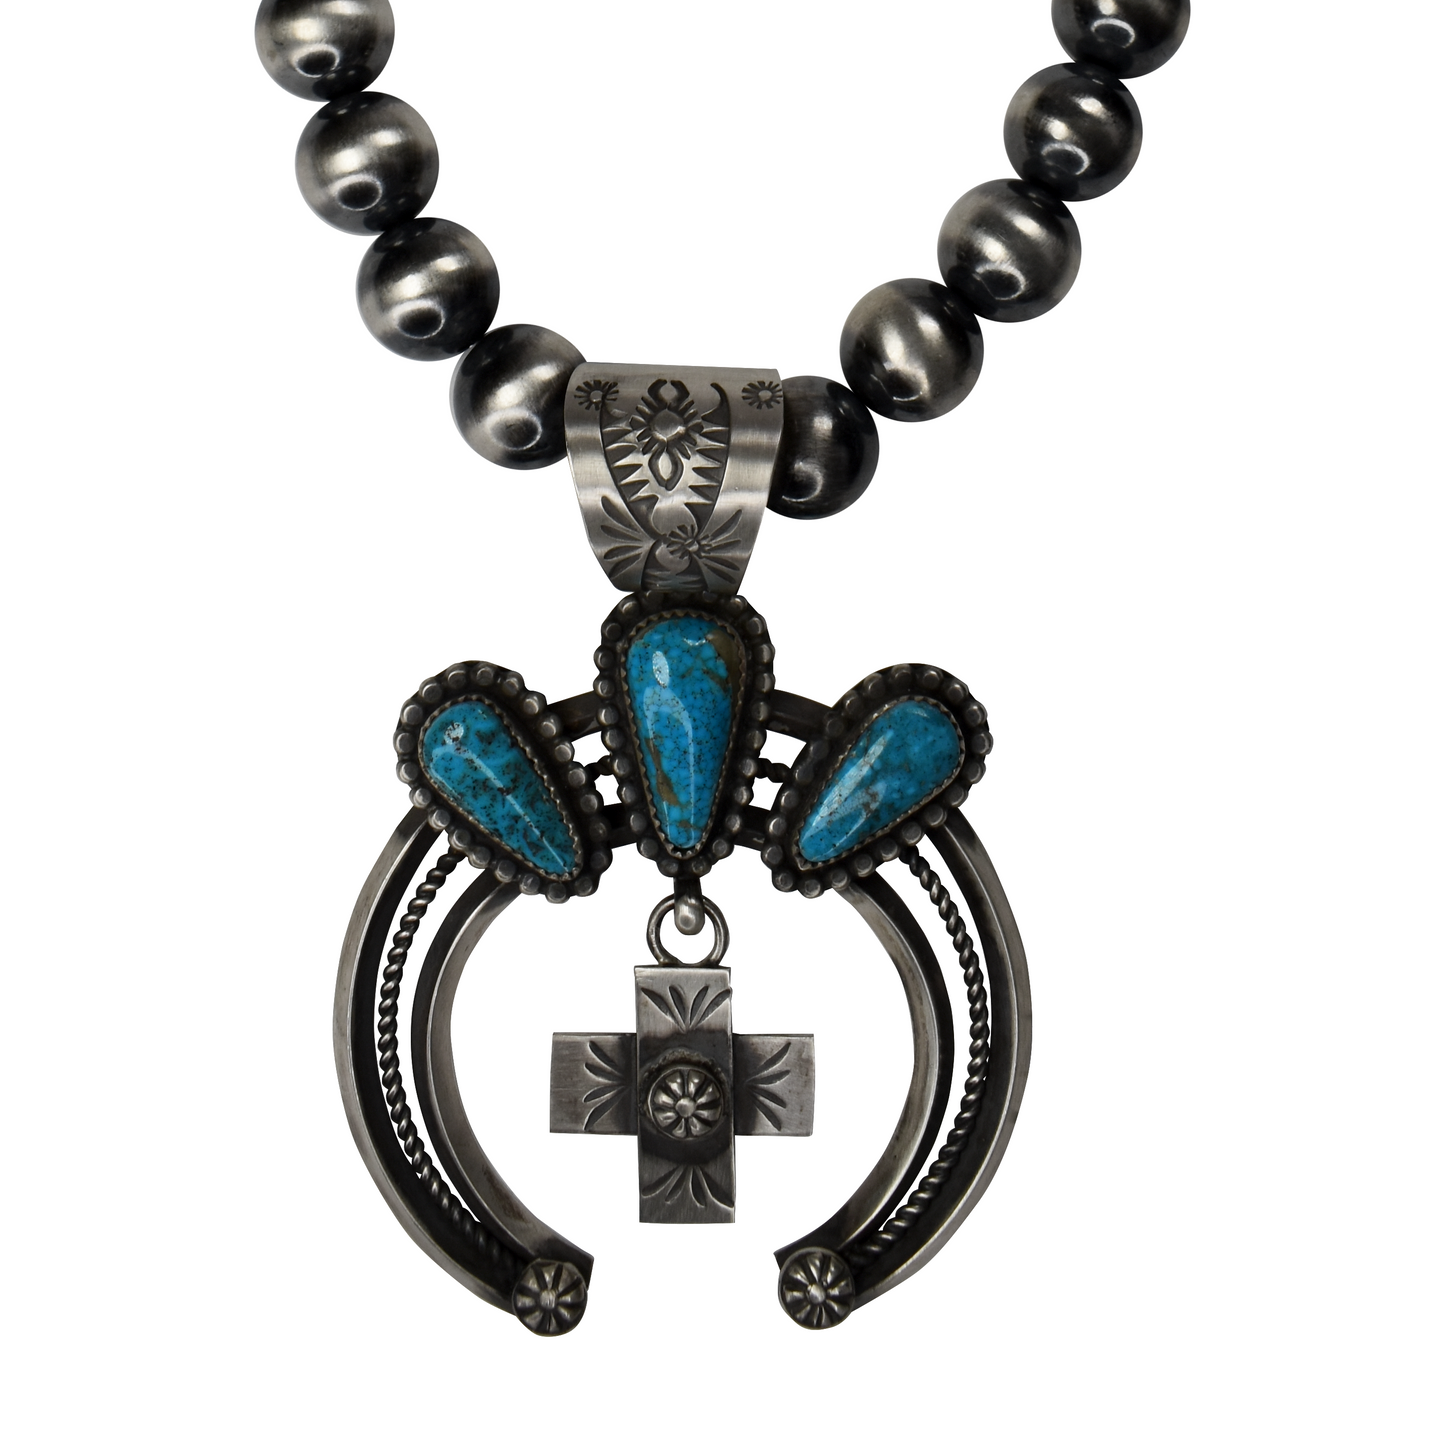 Navajo Pearl Necklace with Kingman Turquoise Cross Pendant by Delbert Secatero